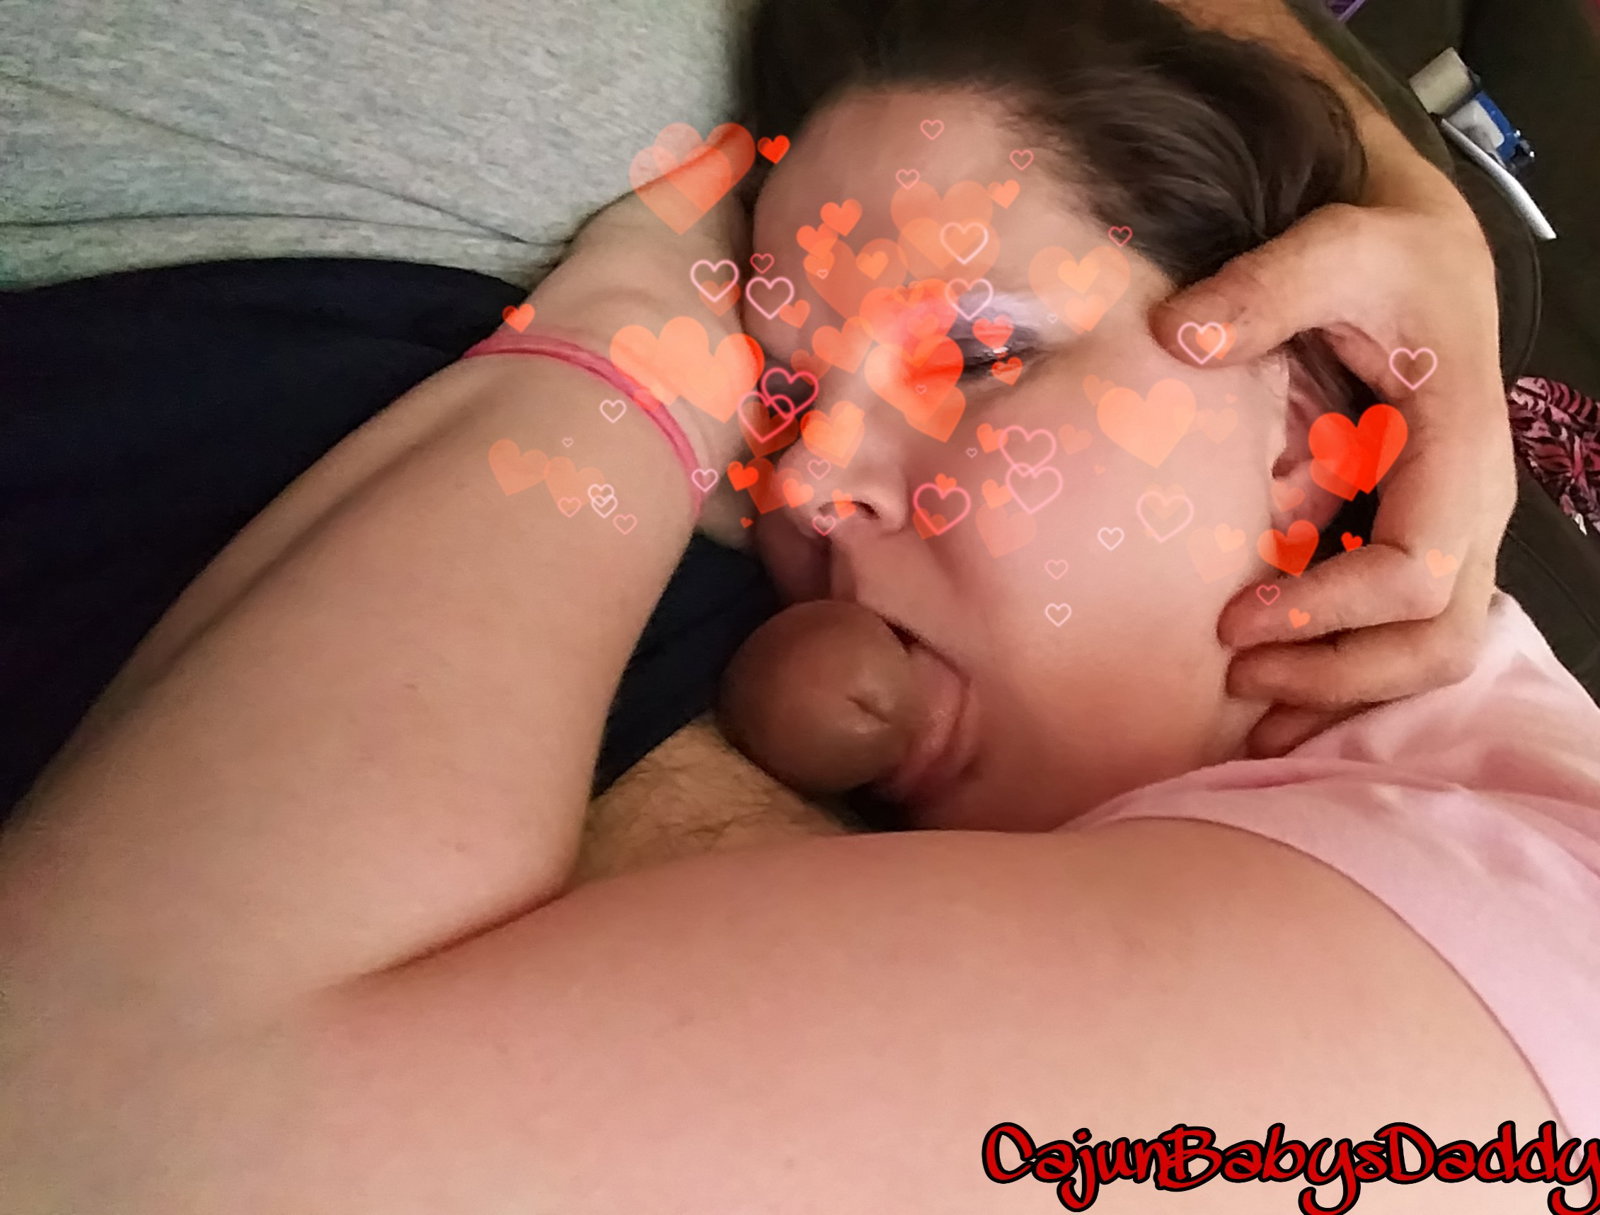 Photo by CajunbabysDaddy with the username @CajunbabysDaddy,  January 11, 2019 at 11:59 AM. The post is about the topic Amateur and the text says 'Who needs a paci when Daddy's cock is there?'